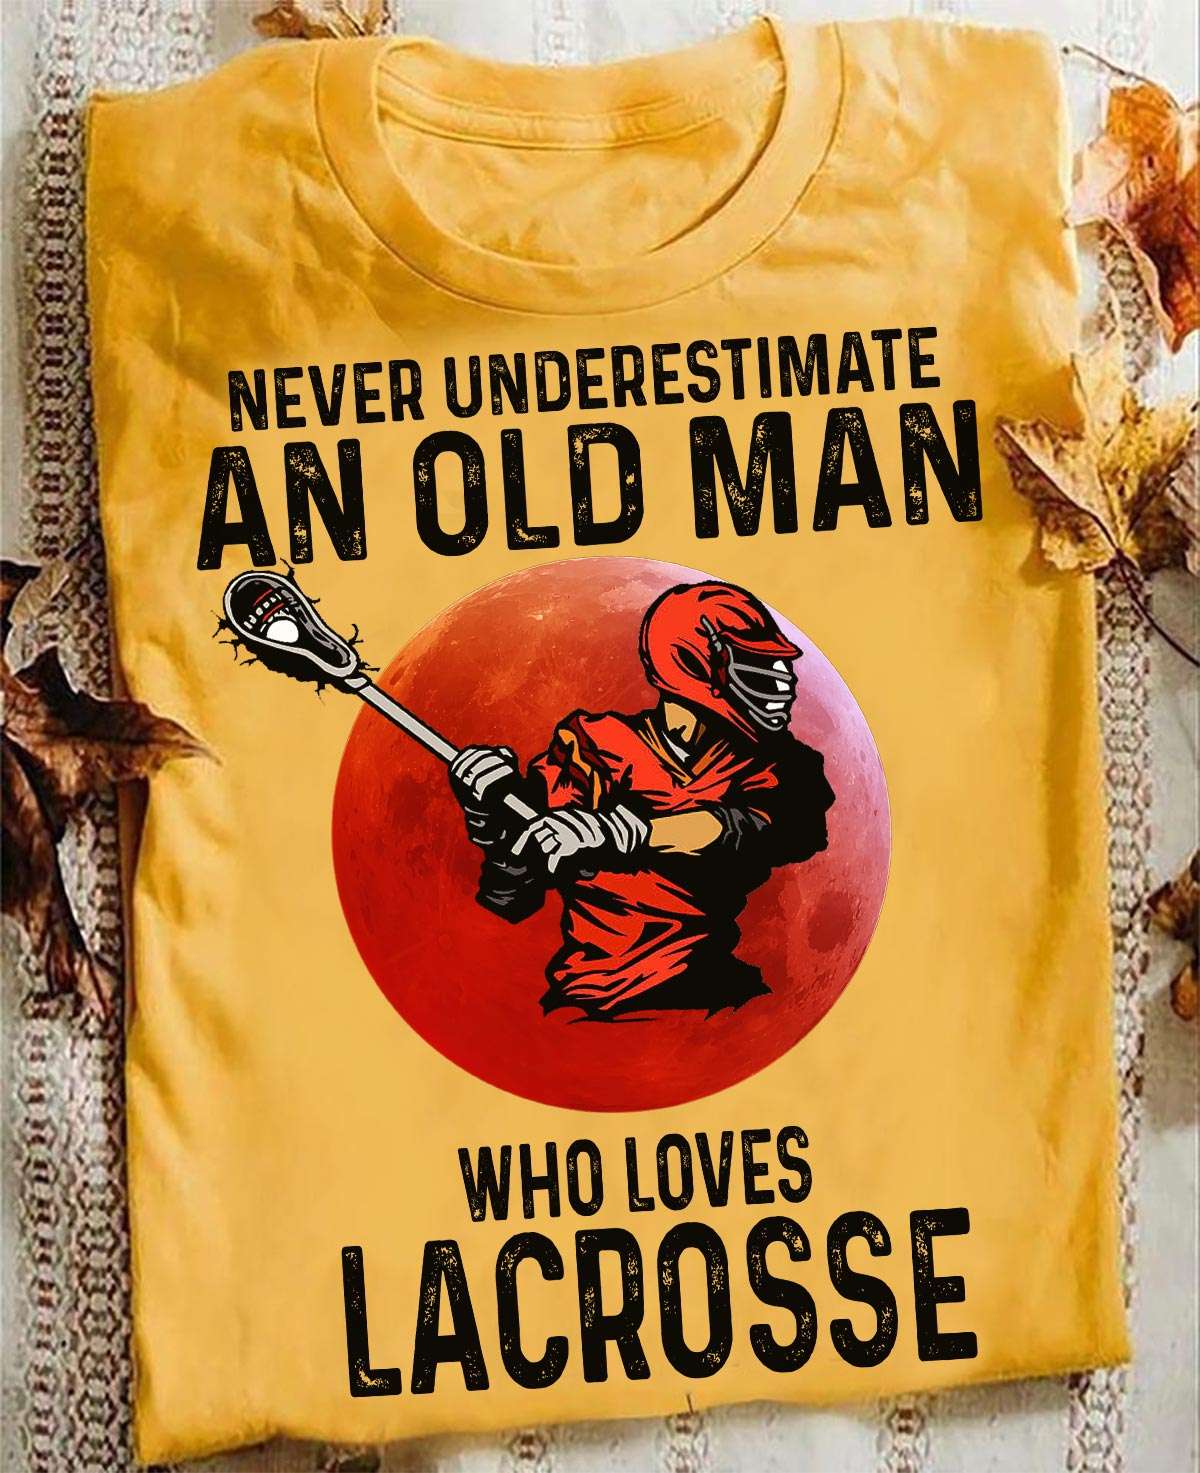 Never underestimate an old man who loves Lacrosse - Lacrosse player, lacrosse the sport